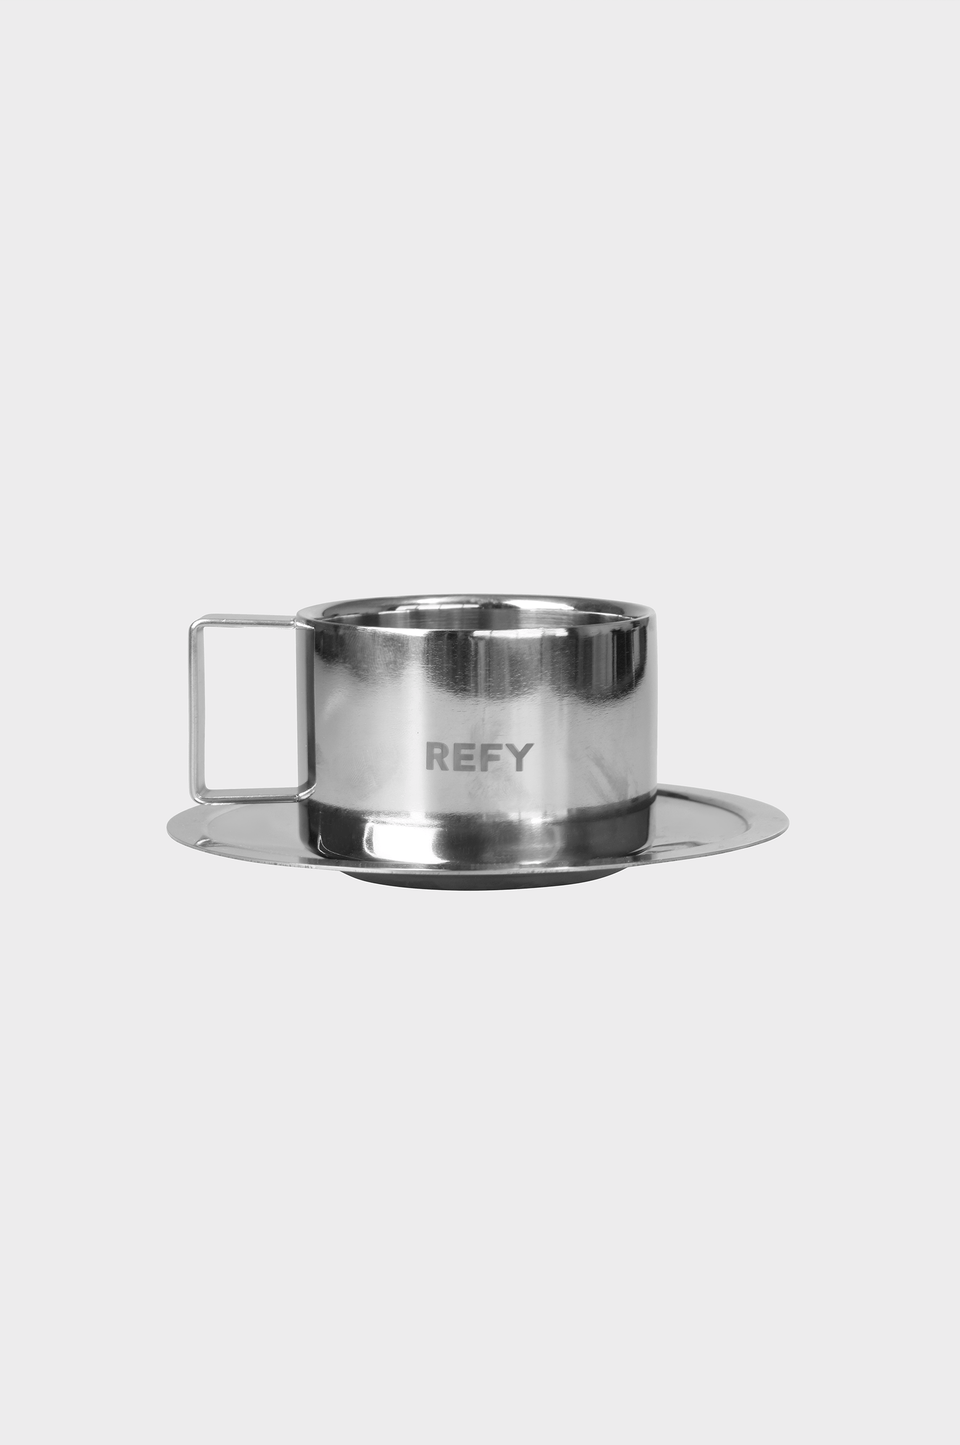 CLOSE UP OF REFY METAL CUP AND SAUCER